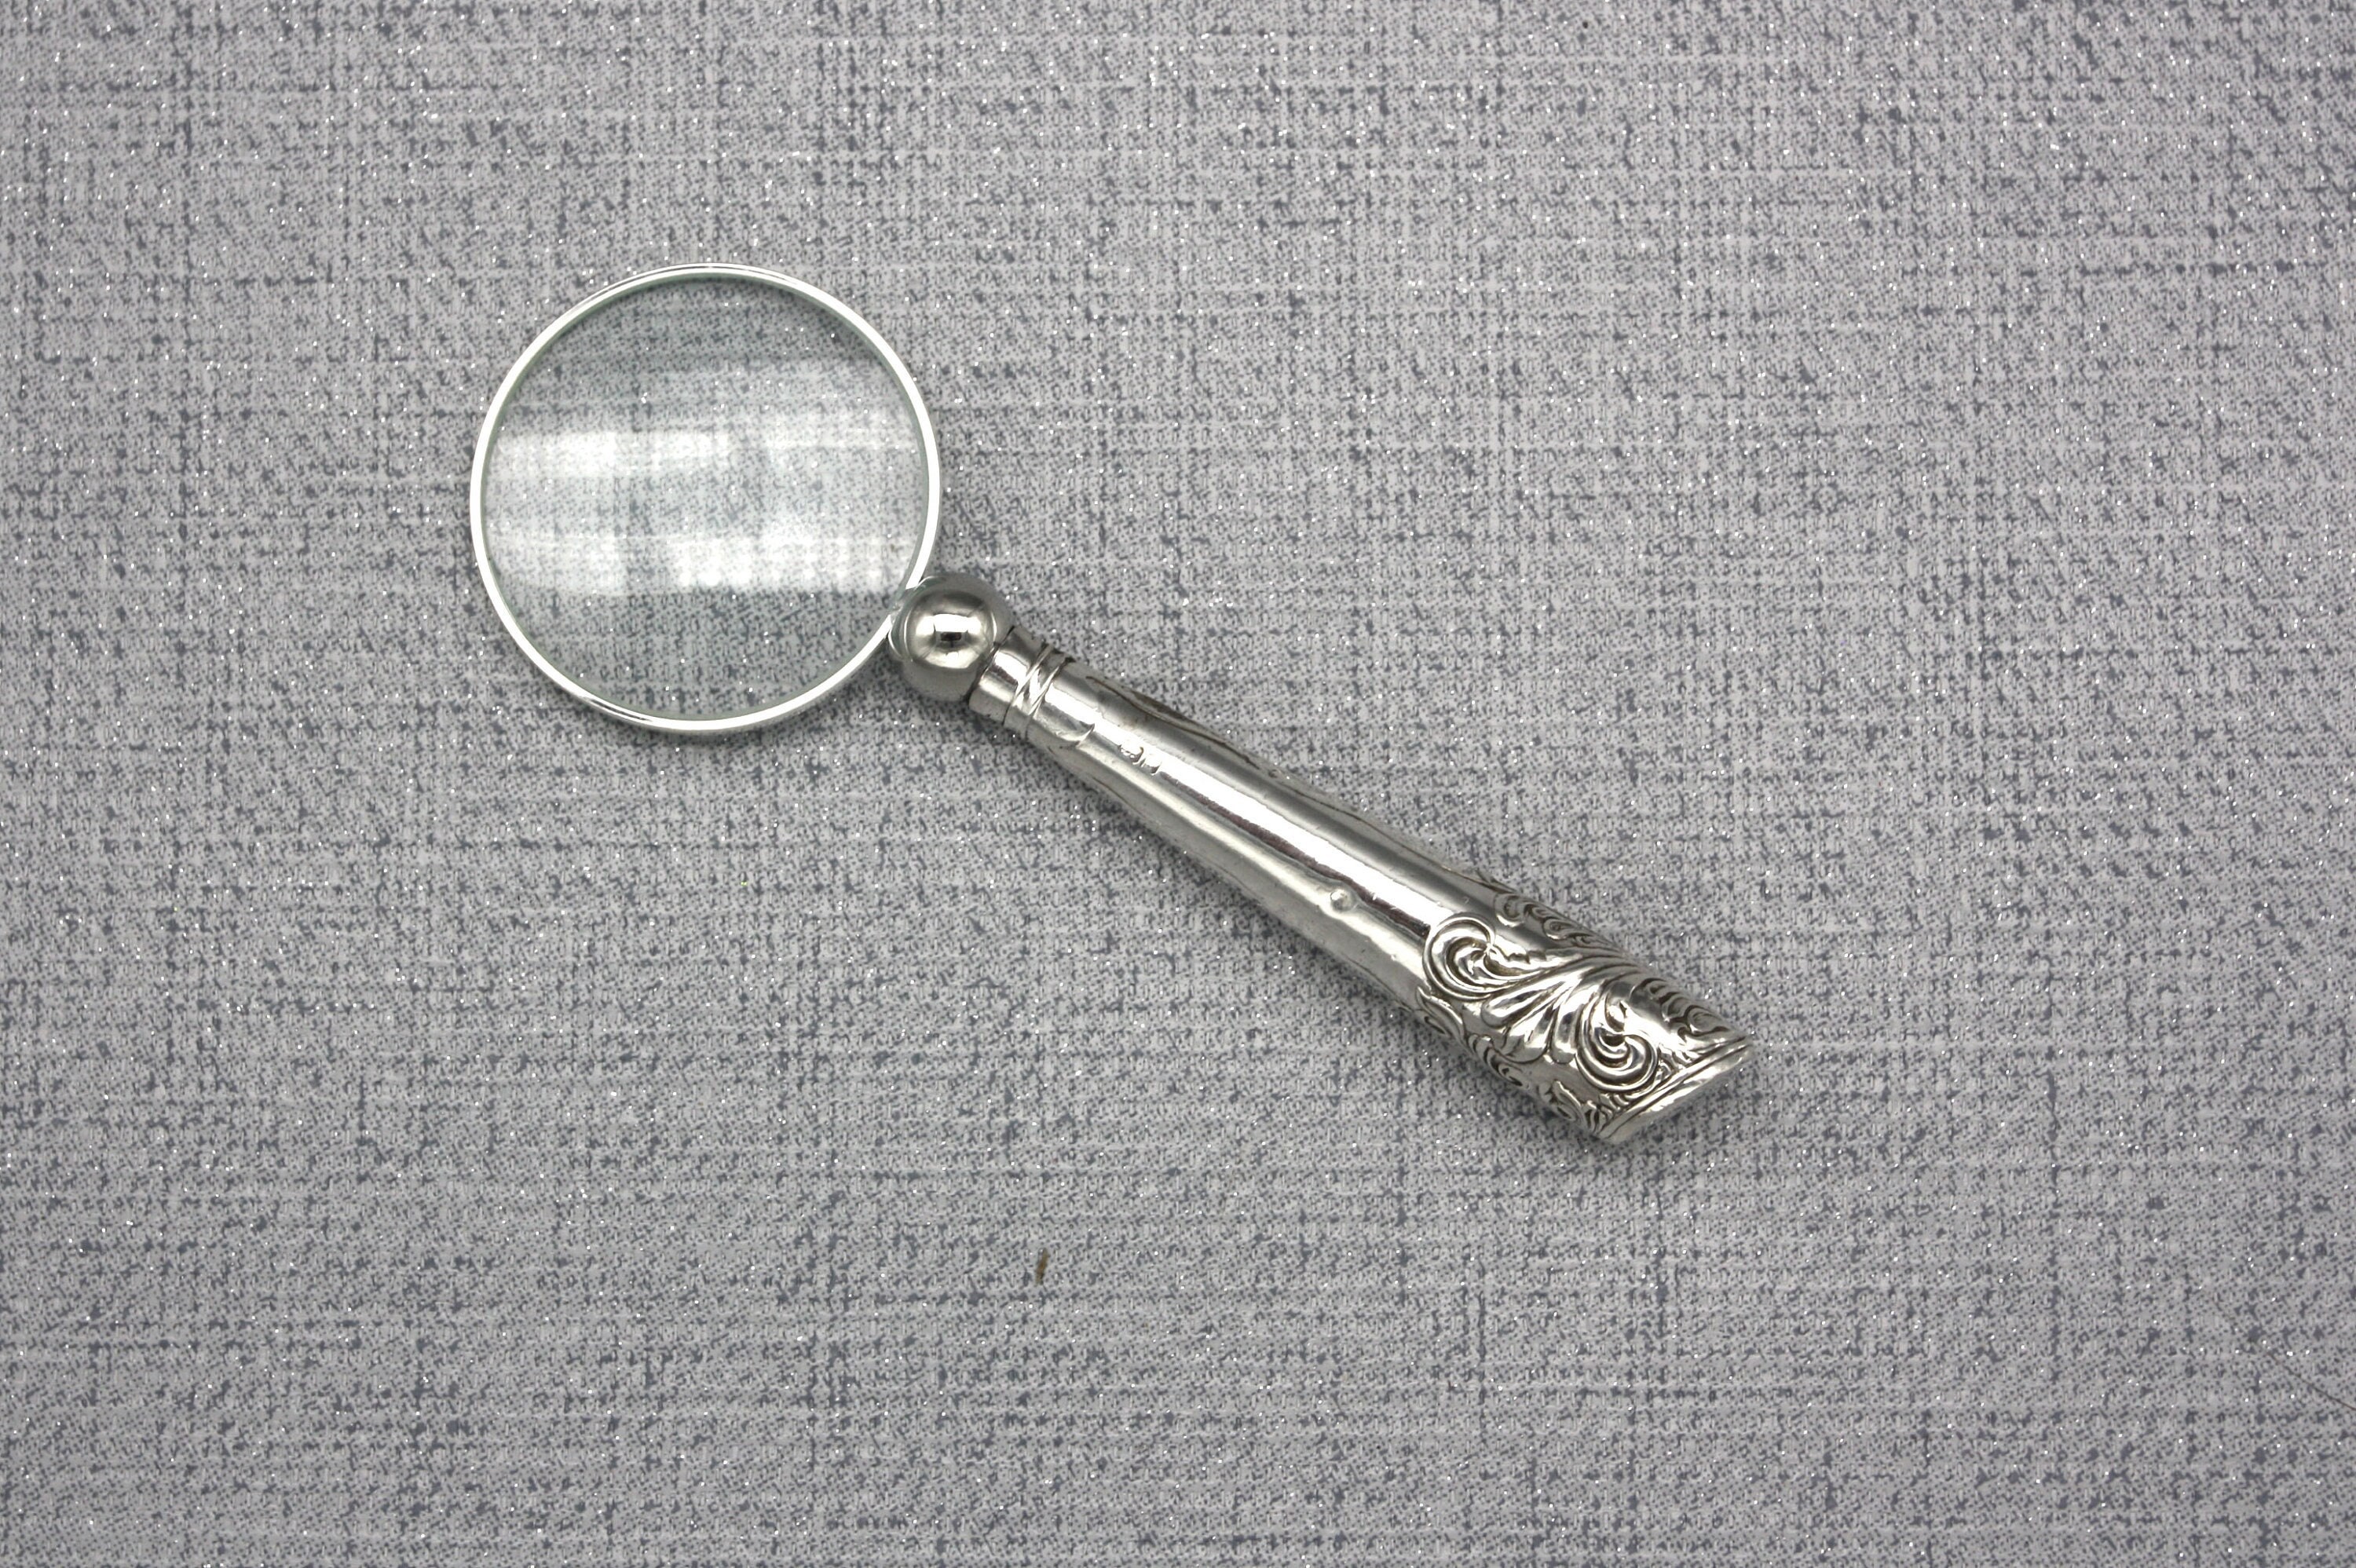 Small Magnifying Glass With Antique Sterling Silver Handle Dated 1924  Vintage Handled Magnifier Made From Reclaimed Cutlery Fab Gifts 